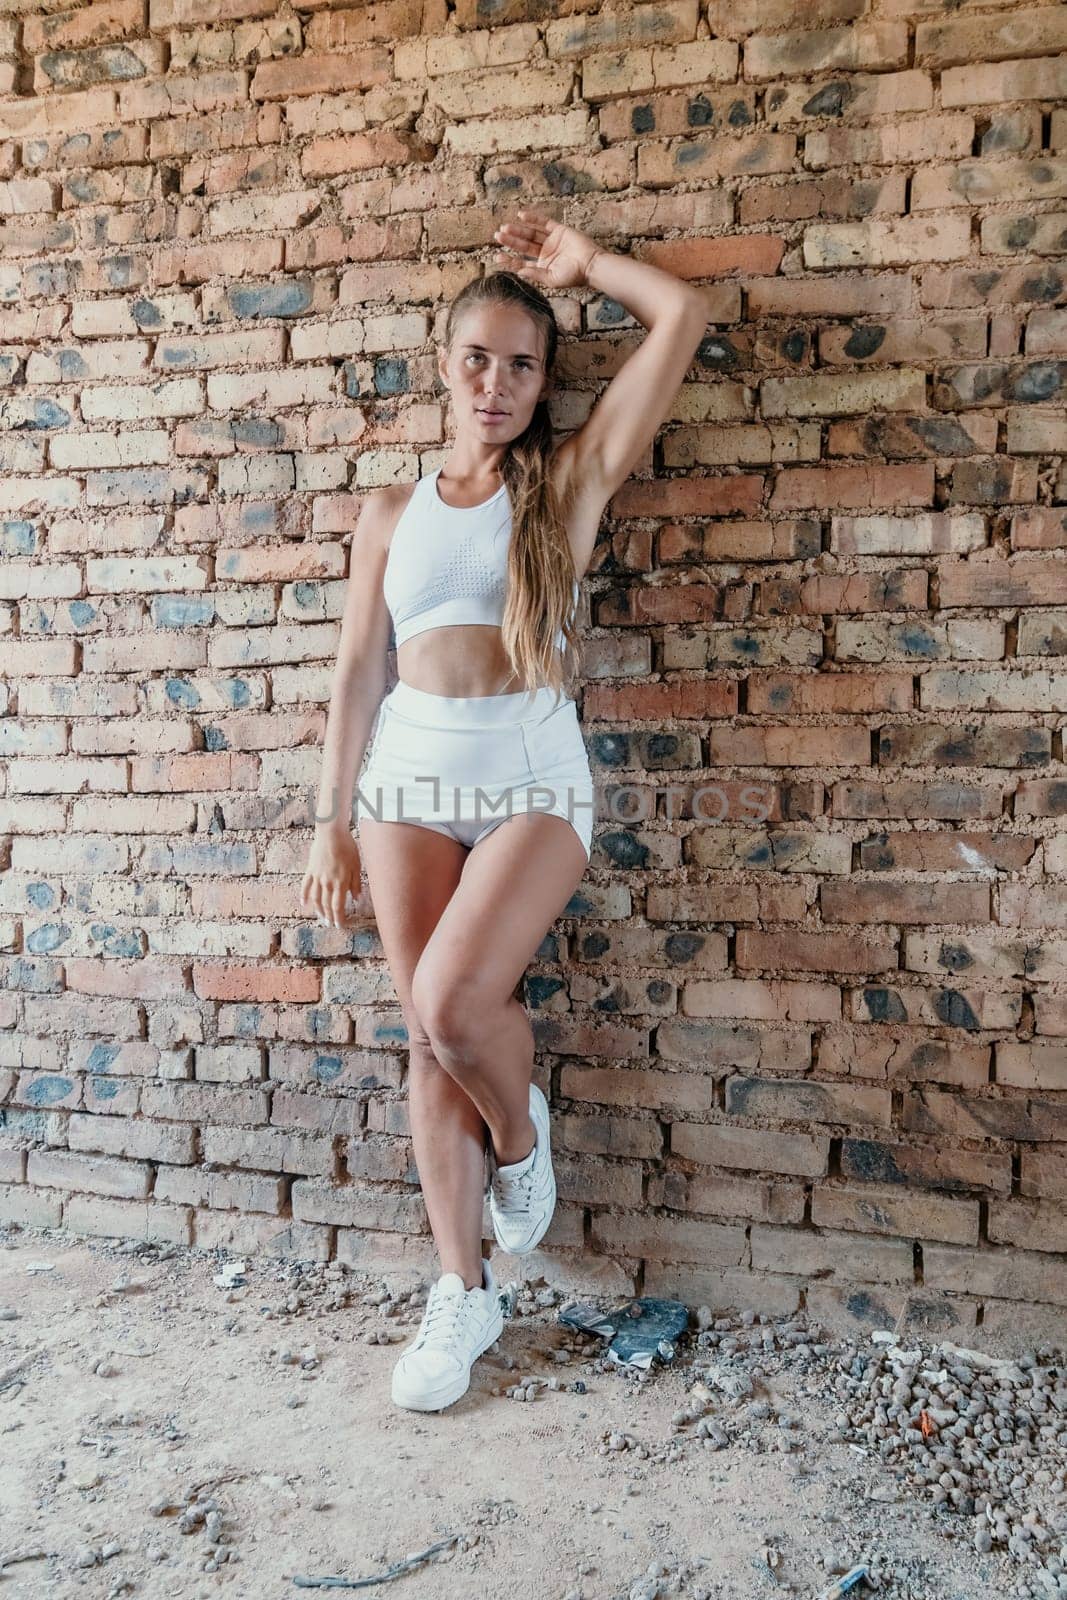 A mid-30s happy woman with long hair natural color poses in her underwear, smiling in front of a brick wall on a construction site for model tests by panophotograph